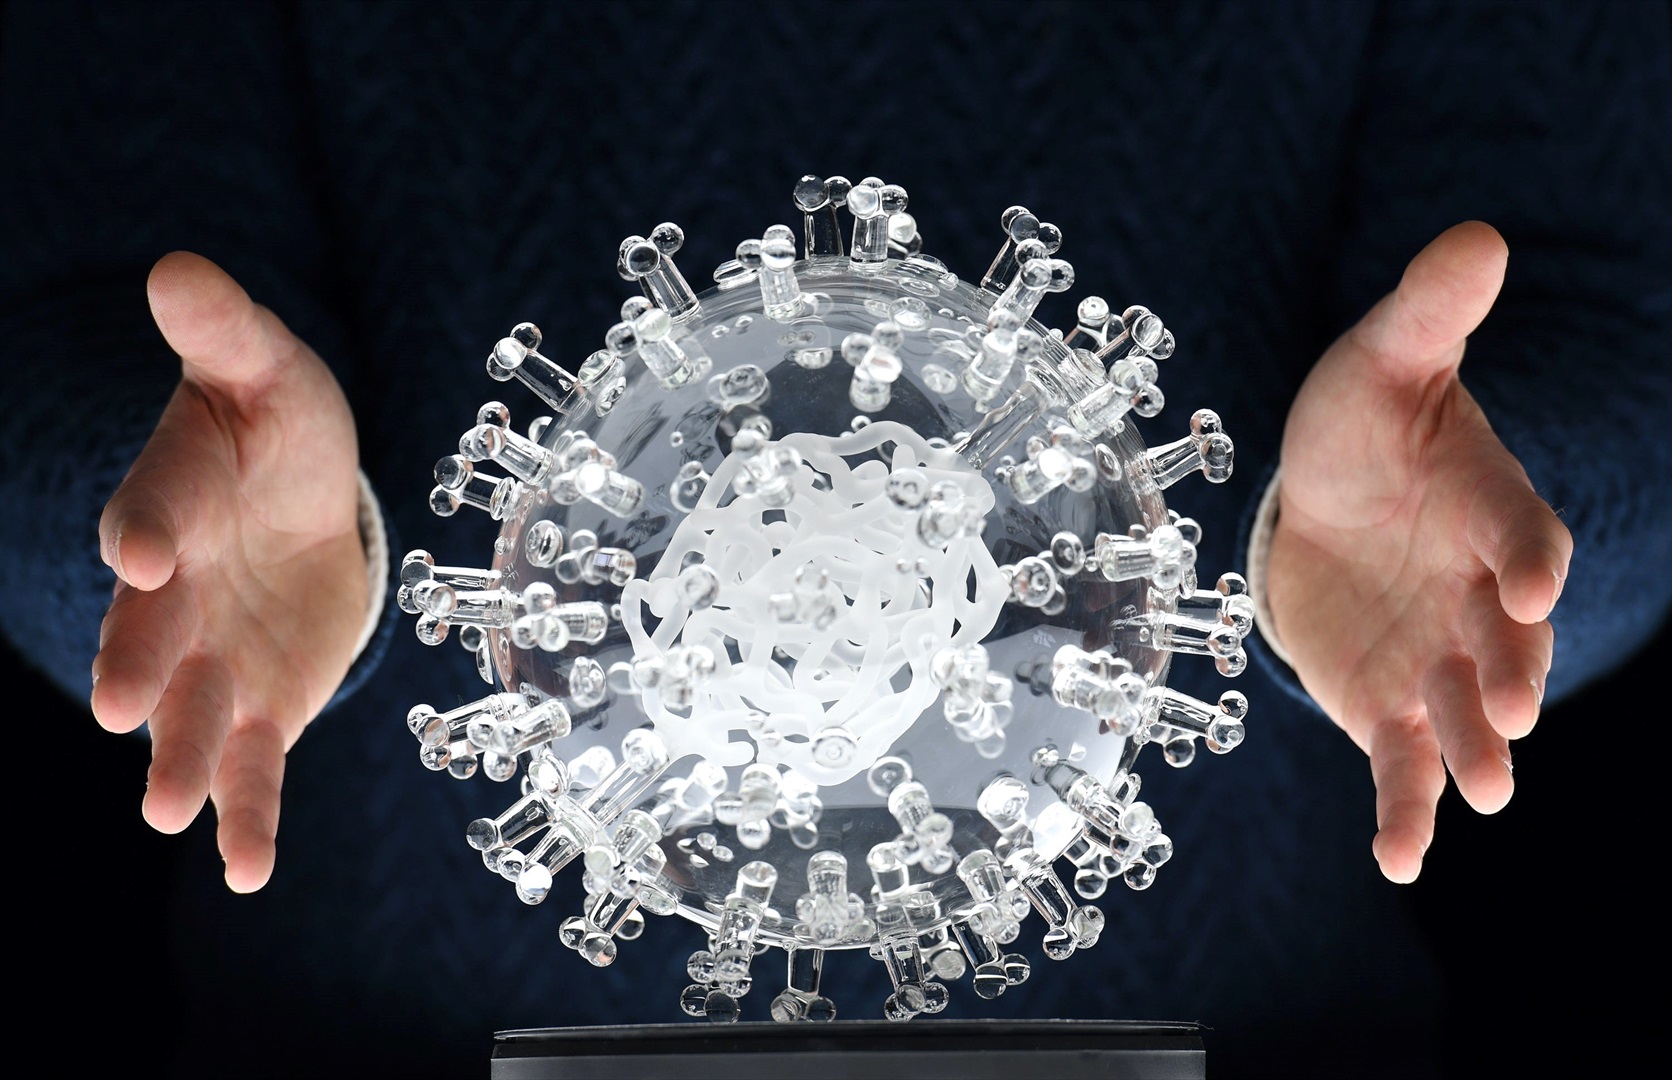 A glass model of the novel coronavirus, which causes the disease Covid-19, by the artist Luke Jerram in the UK on 18 March. The model is about 1 million times as large as the actual virus.